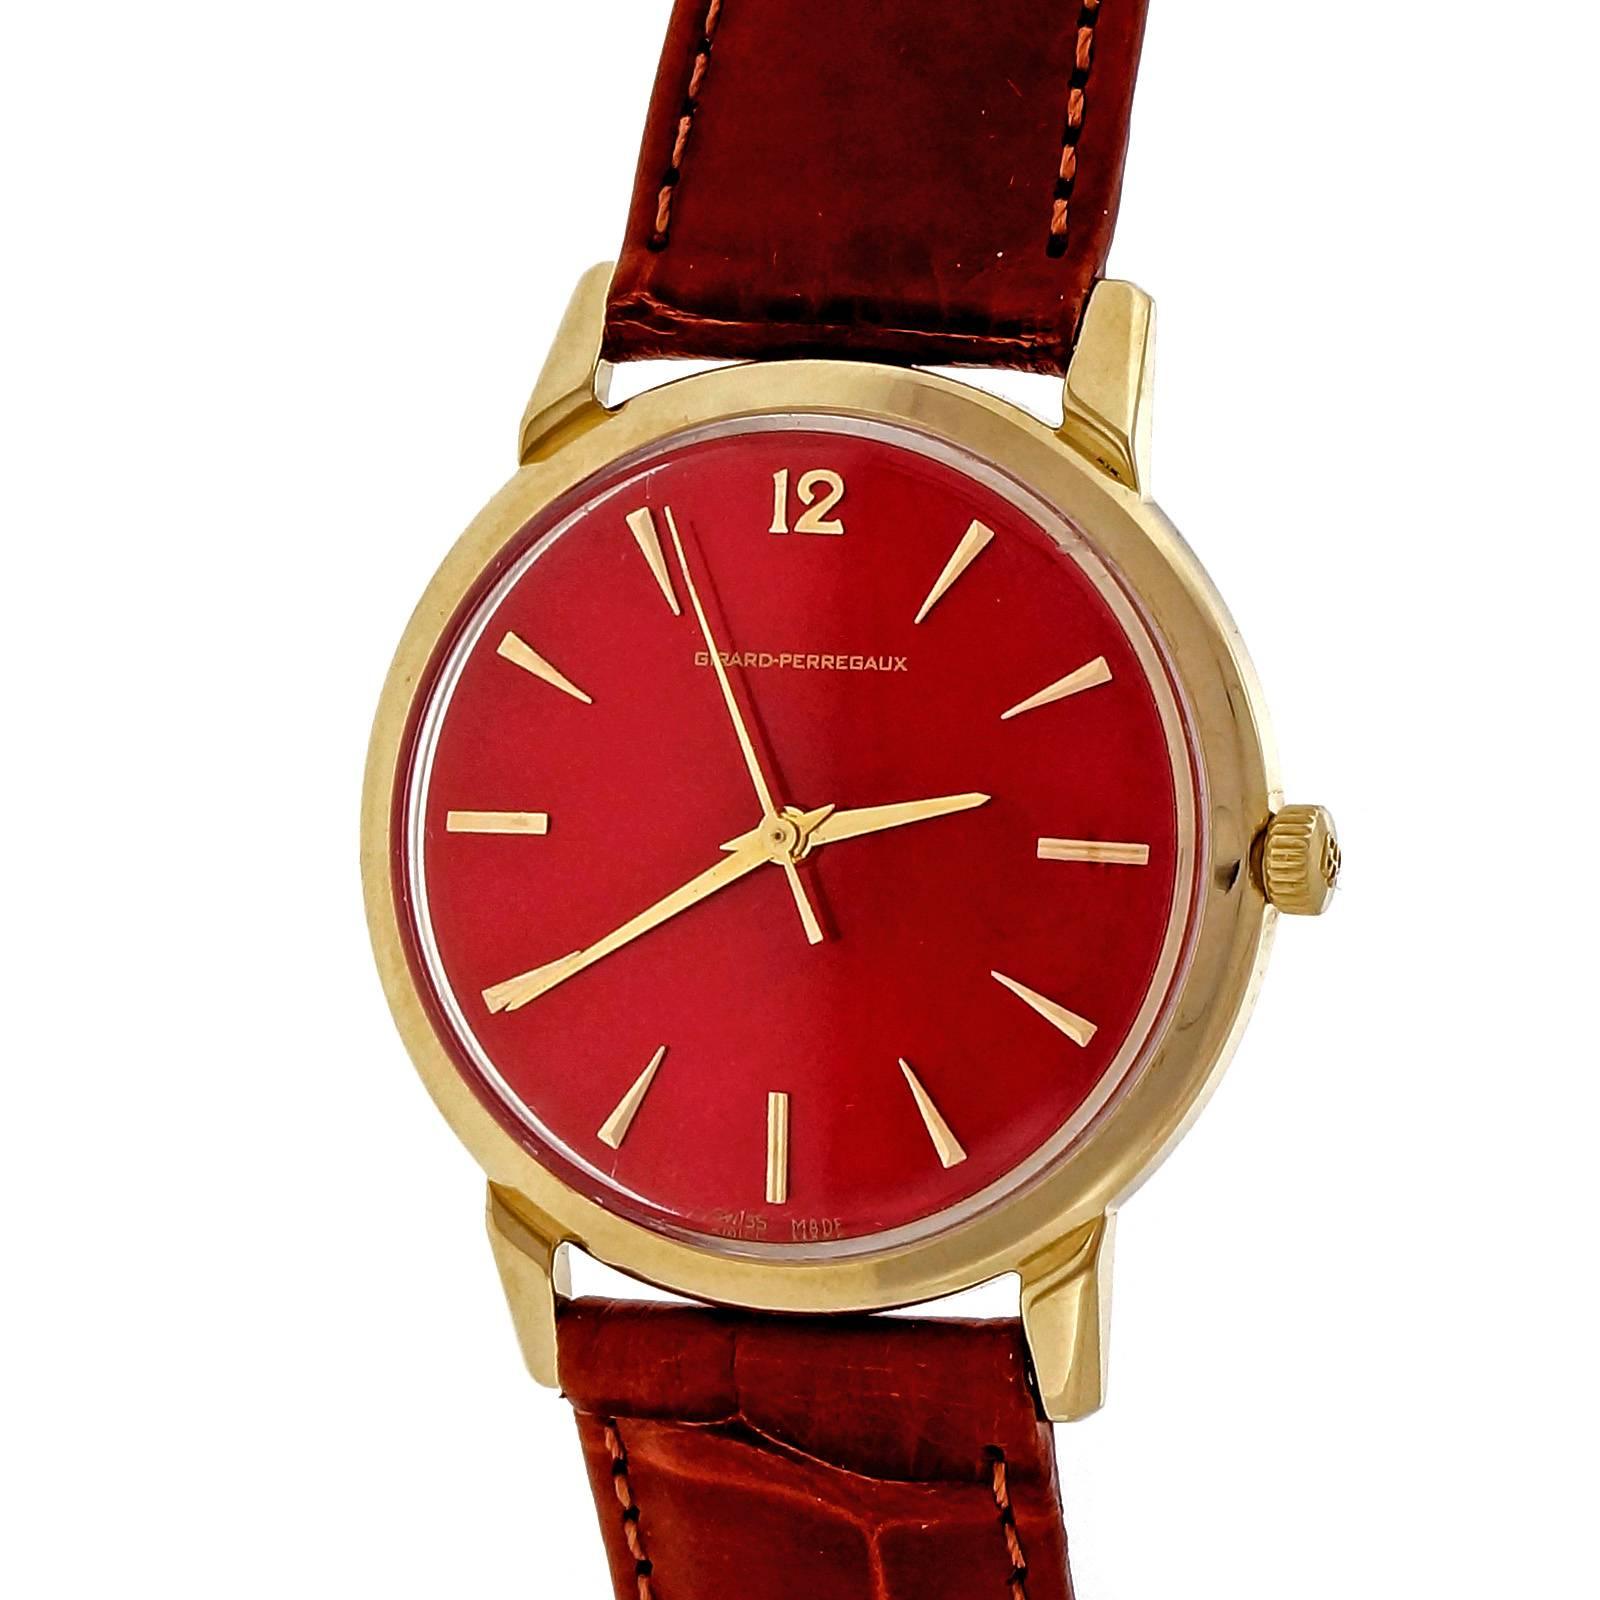 Vintage 1960’s self-wind Girard Perregaux solid 14k gold. Classic clean look round wrist watch with original dial custom refinished and custom colored in a special bright shiny red by Peter Suchy. Multiple layer high luster process.

14k yellow